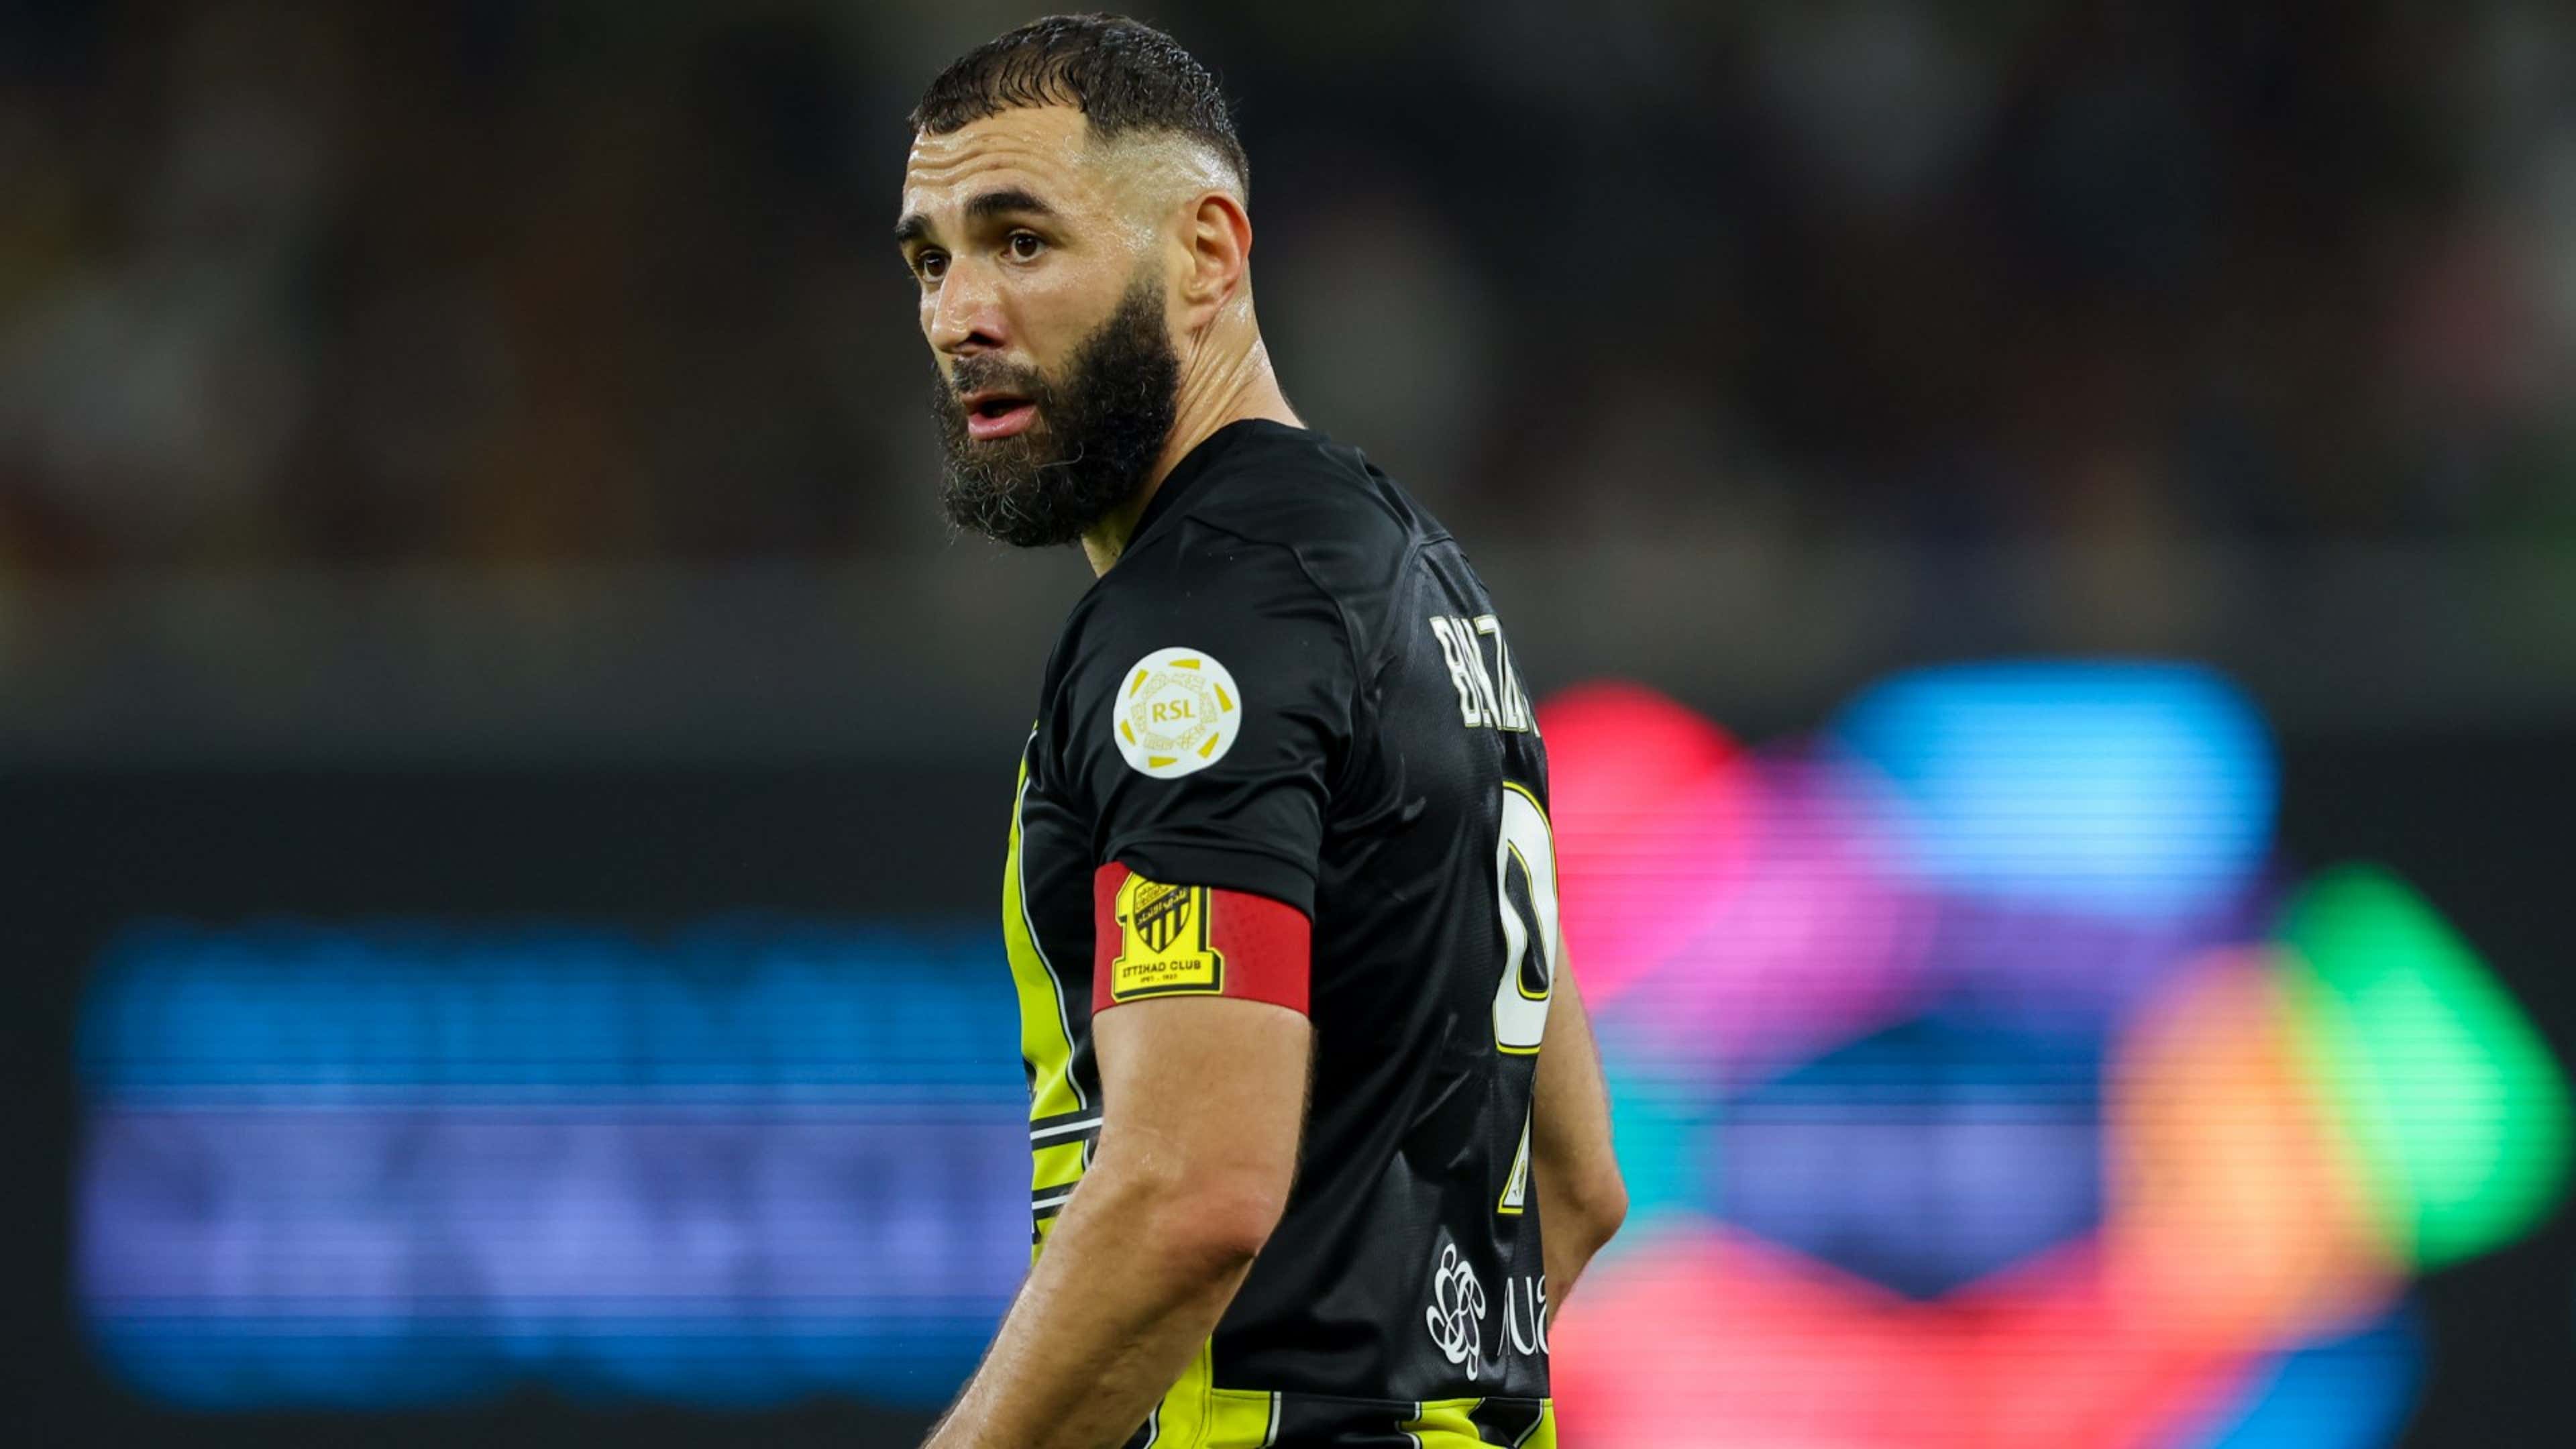 Al-Ittihad furious with Karim Benzema and set to axe striker from Dubai training camp after skipping sessions with Saudi Pro League side | Goal.com